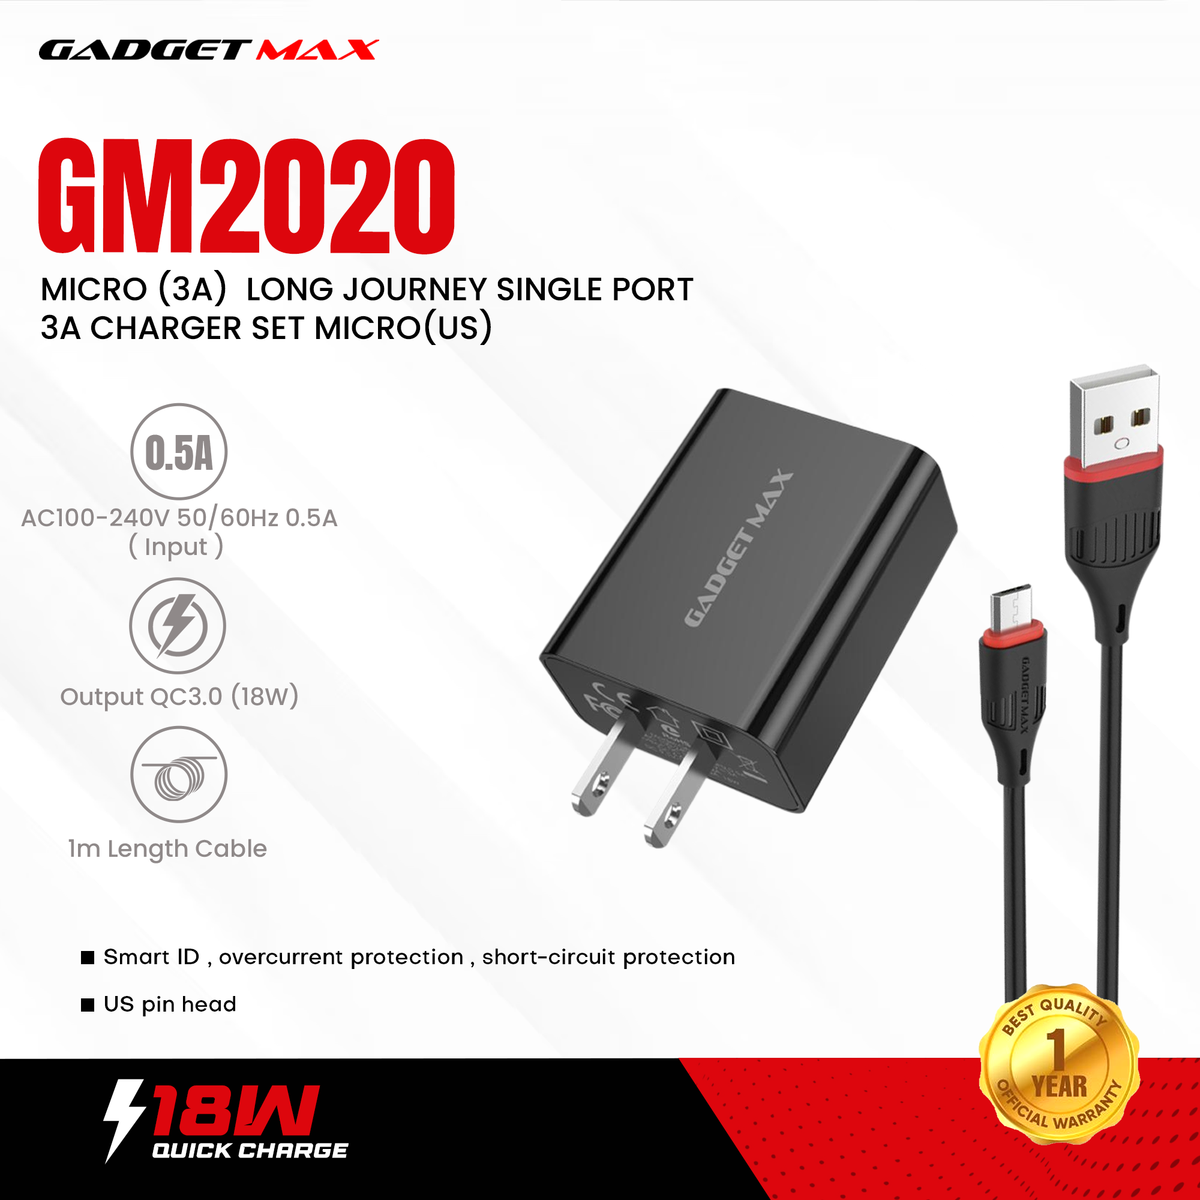 GADGET MAX GM2020 3A QUICK CHARGER WITH MICRO DATA CABLE - BLACK